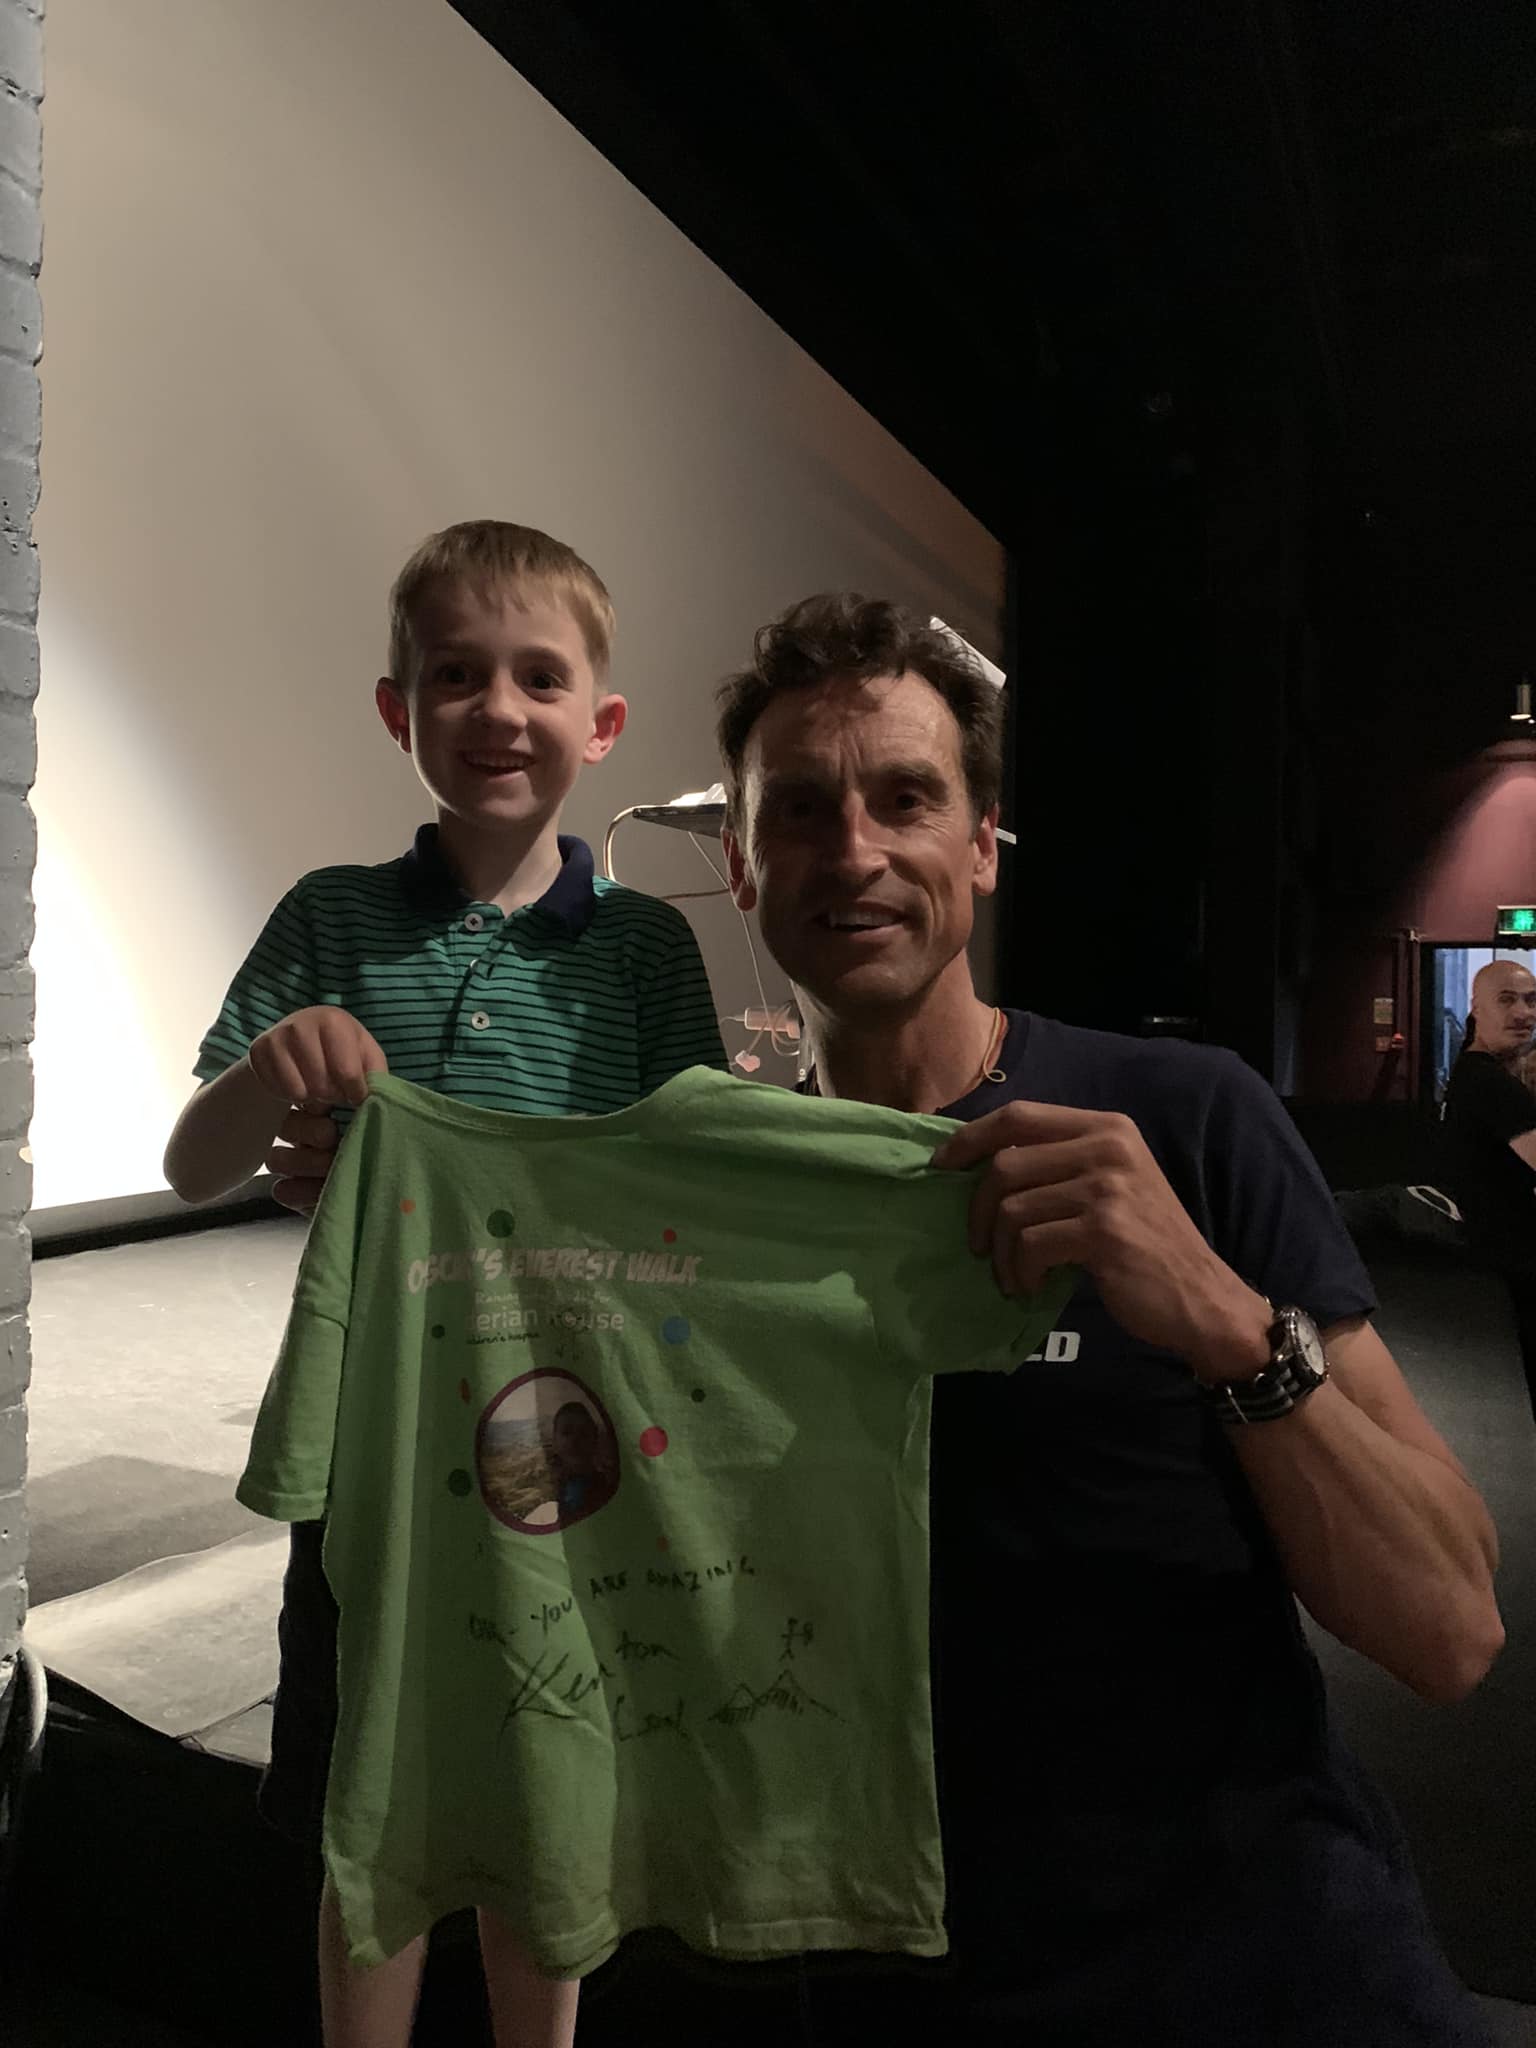 Boy and man holding a T-shirt and smiling at the camera 